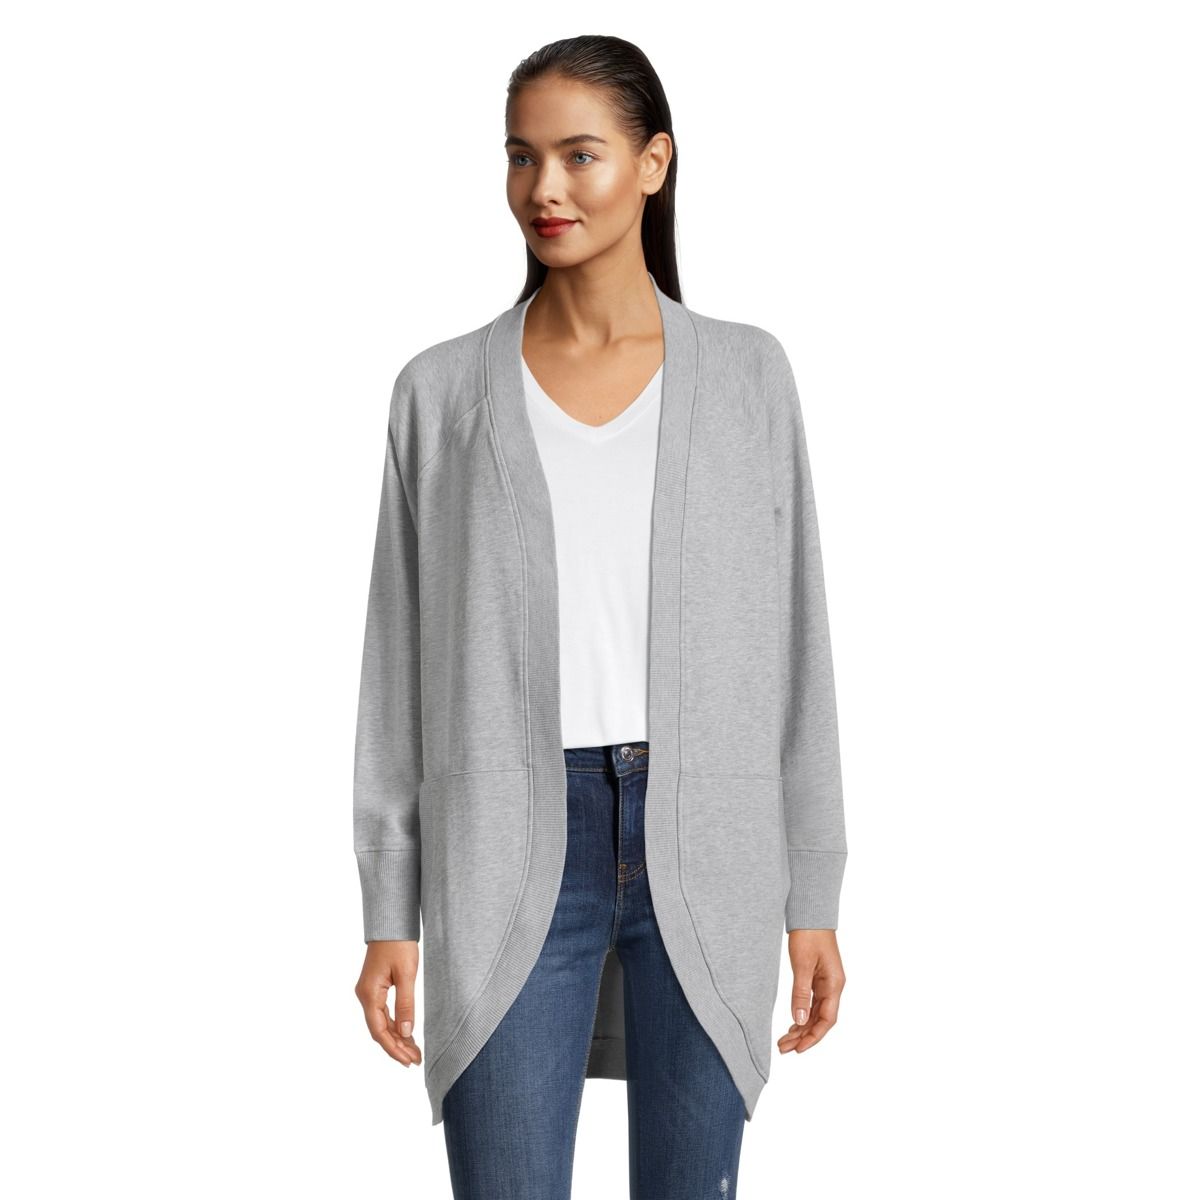 O'Neill Women's Scoop French Terry Cardigan